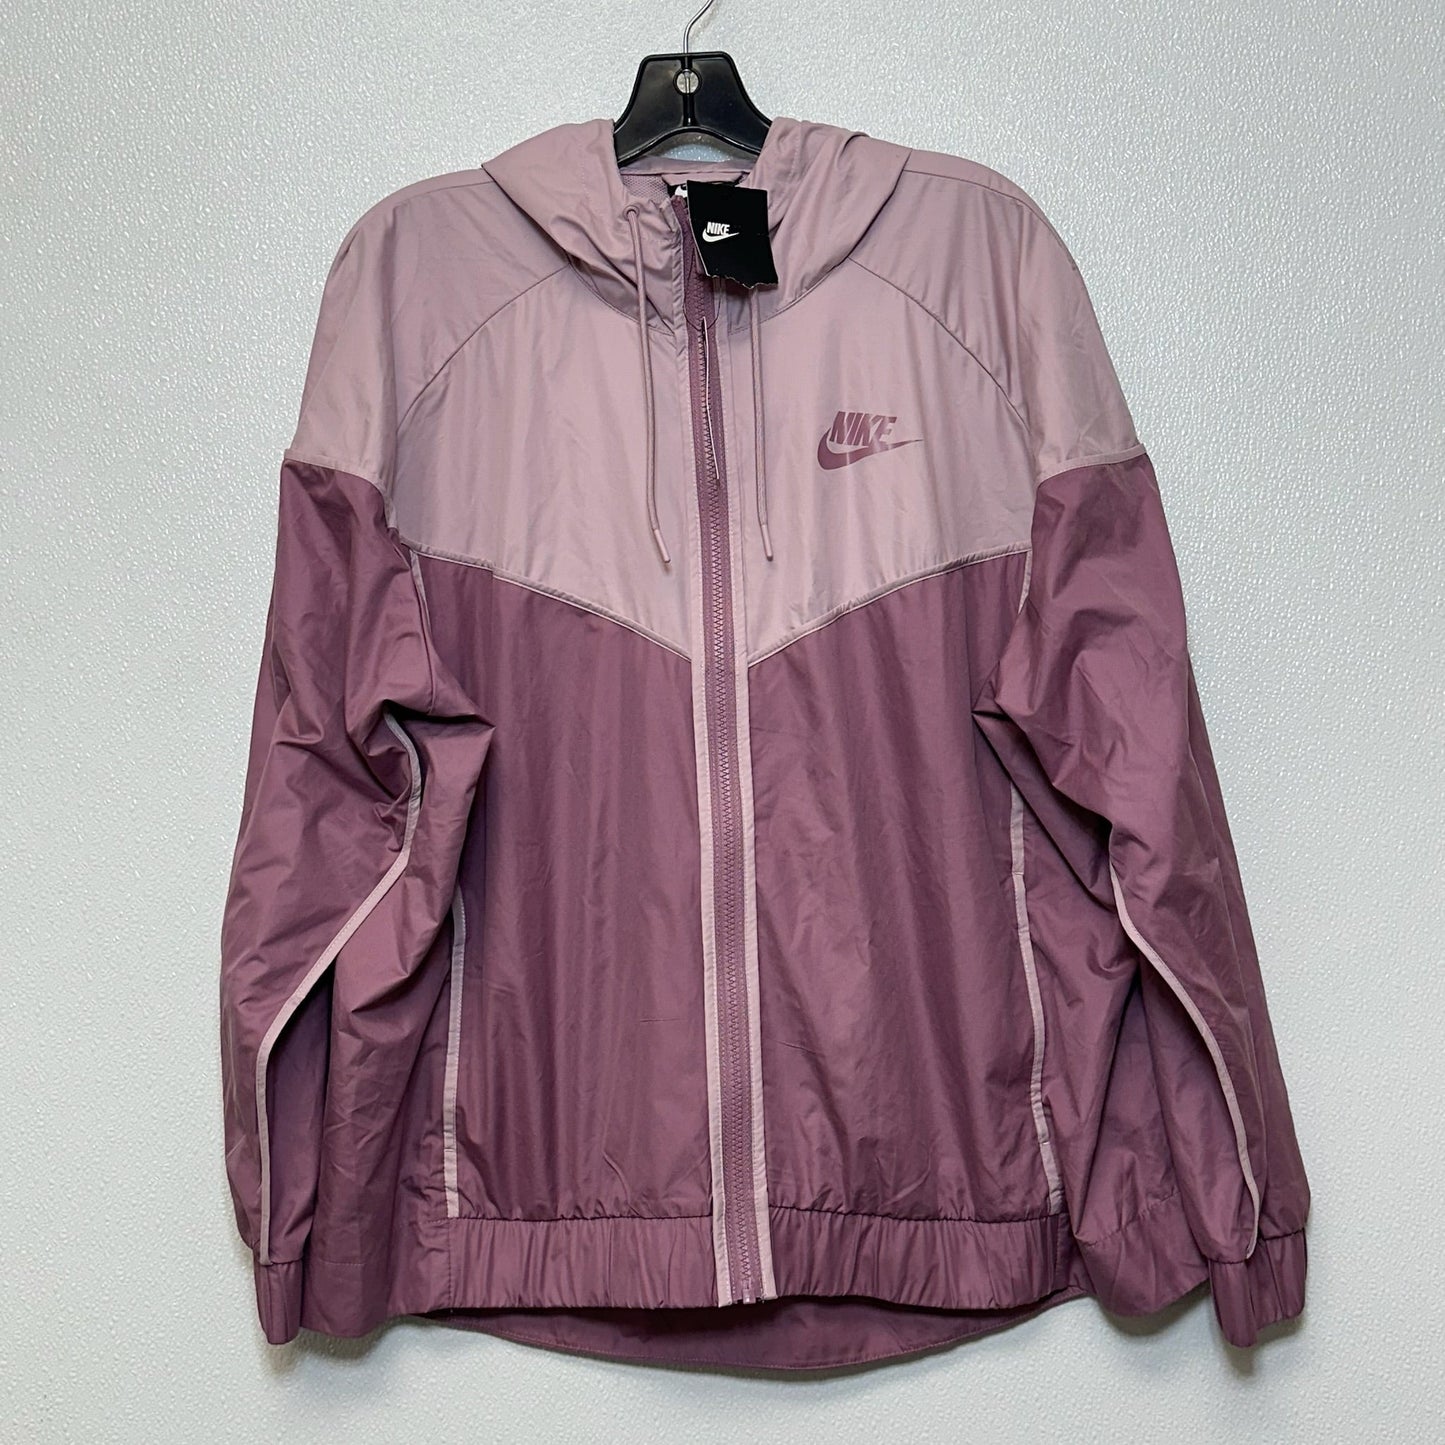 Pink Jacket Other Nike Apparel, Size 2x